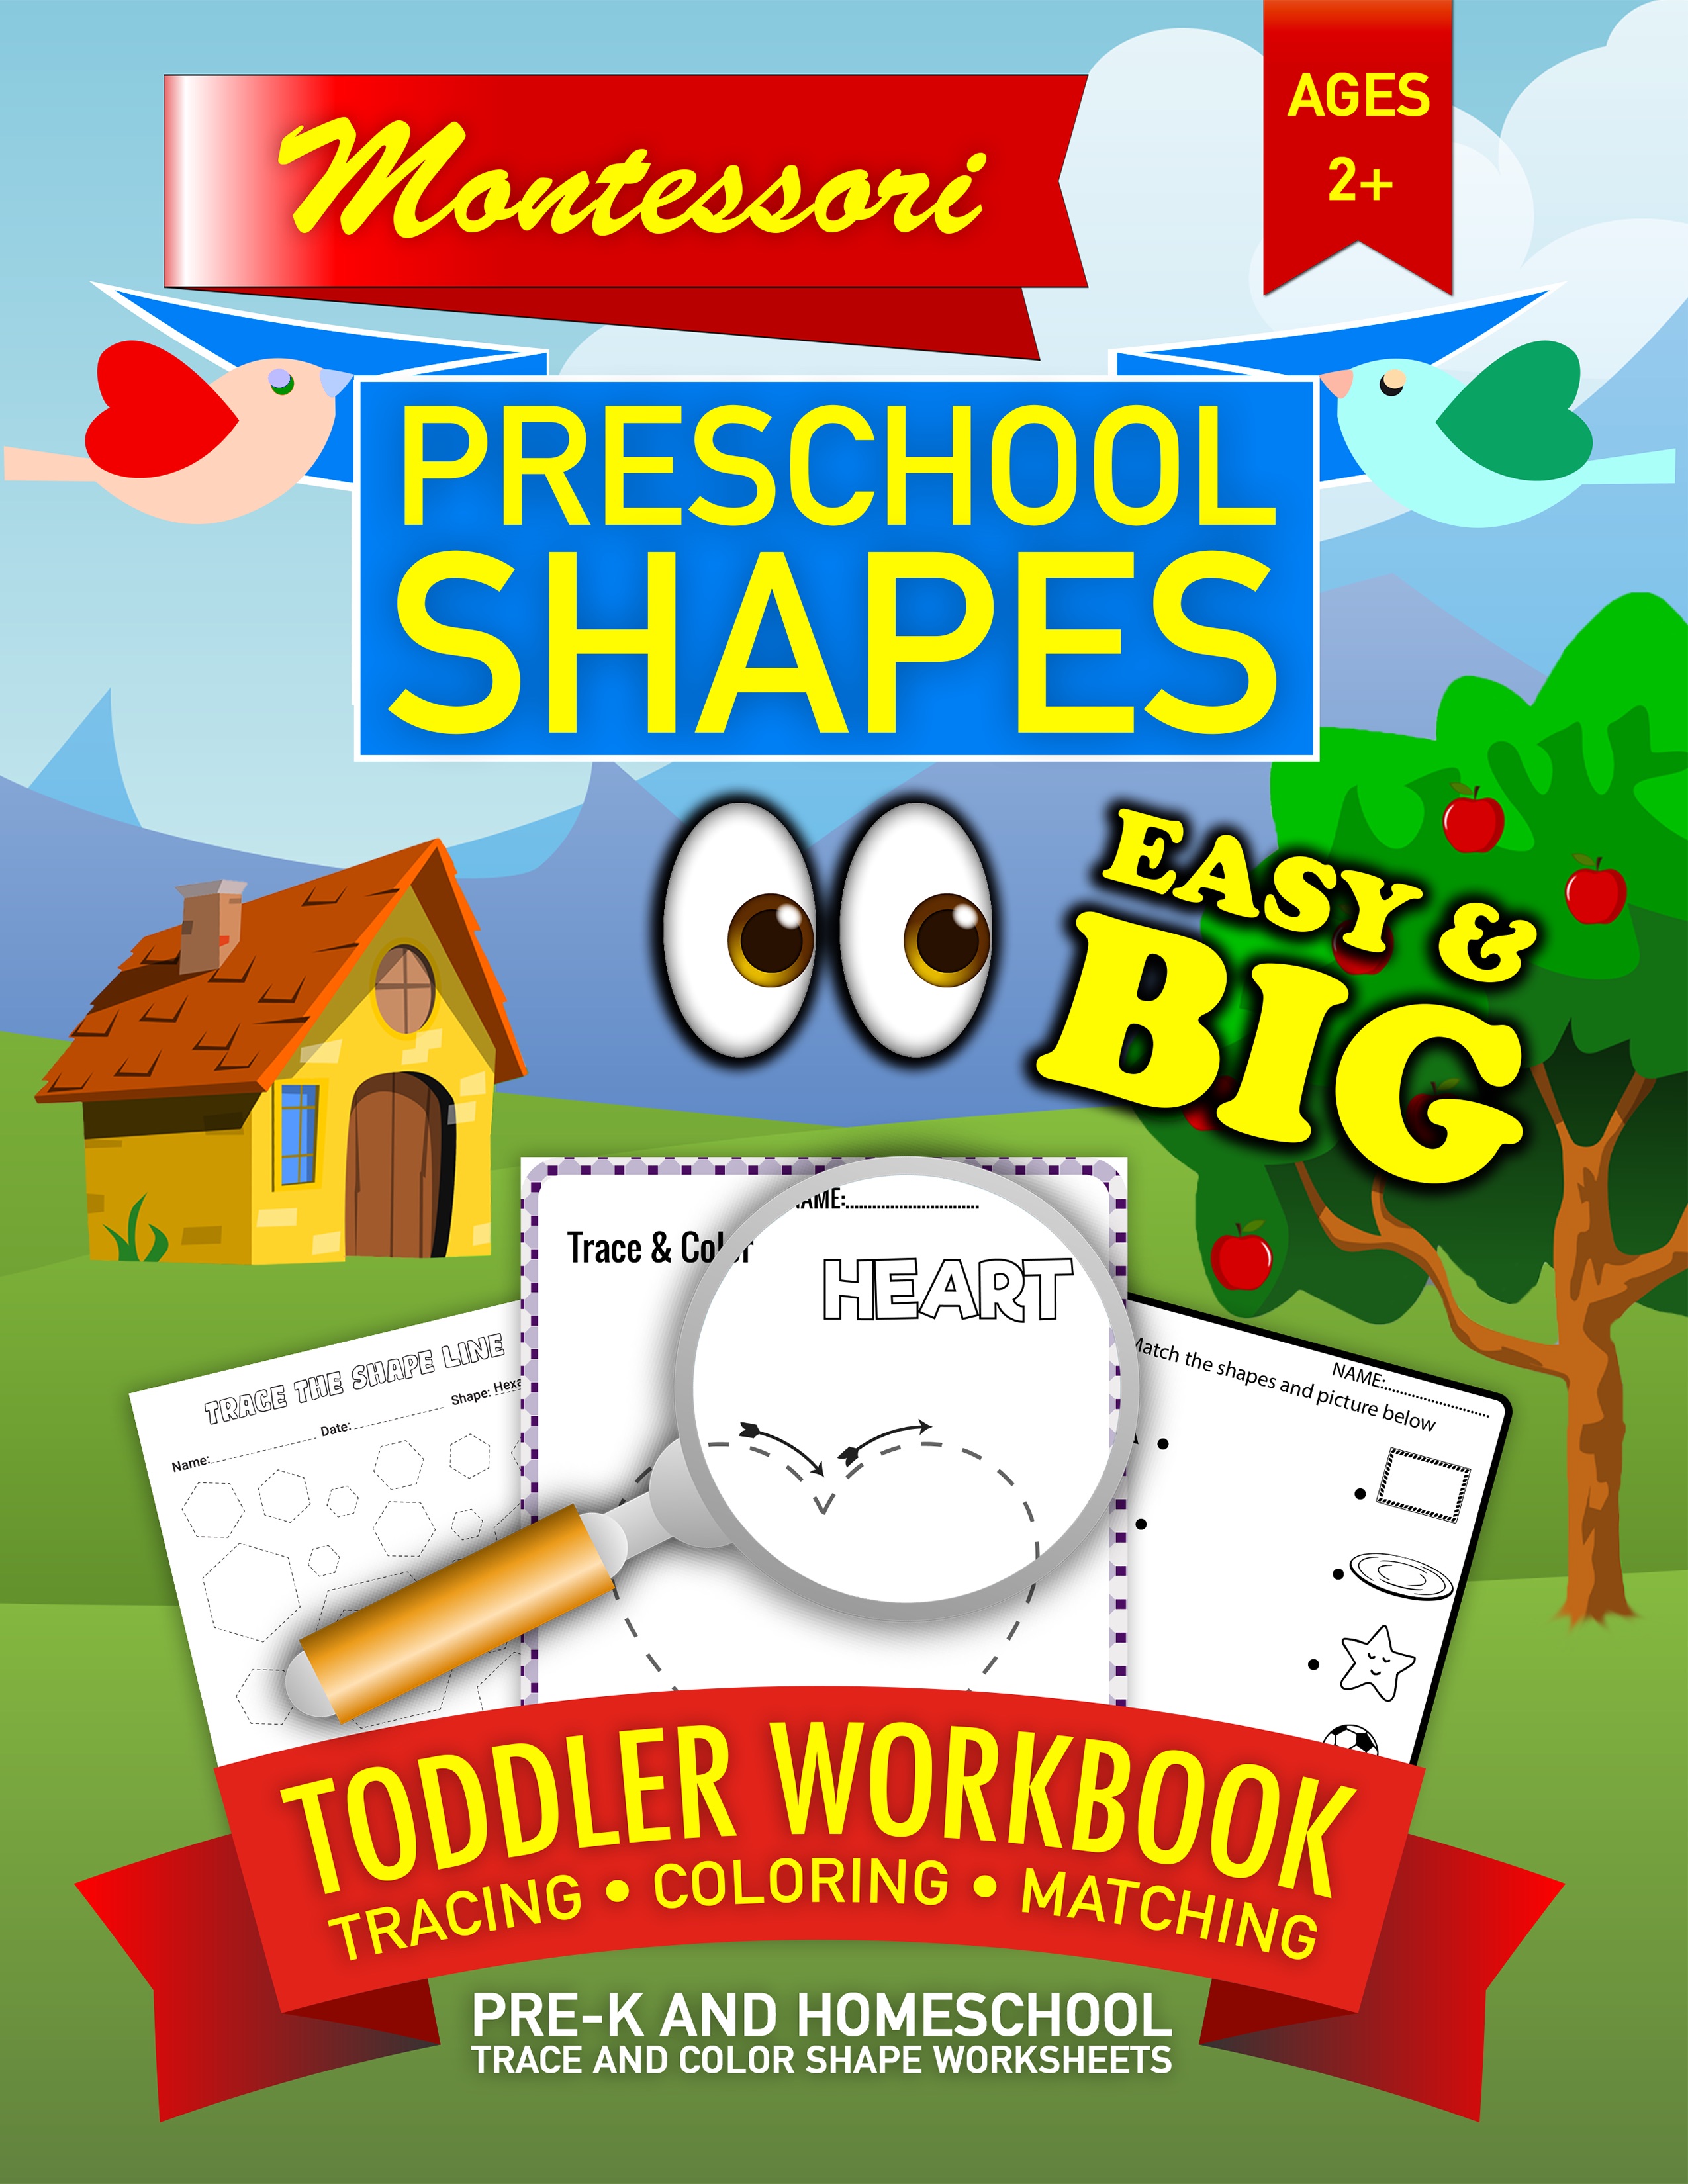 Montessori Workbook • Toddler Preschool Shape Tracing • Pre-K and Homeschool • Matching • Coloring: Learn to Trace Shapes Beginner Worksheets and Workbooks For Preschool